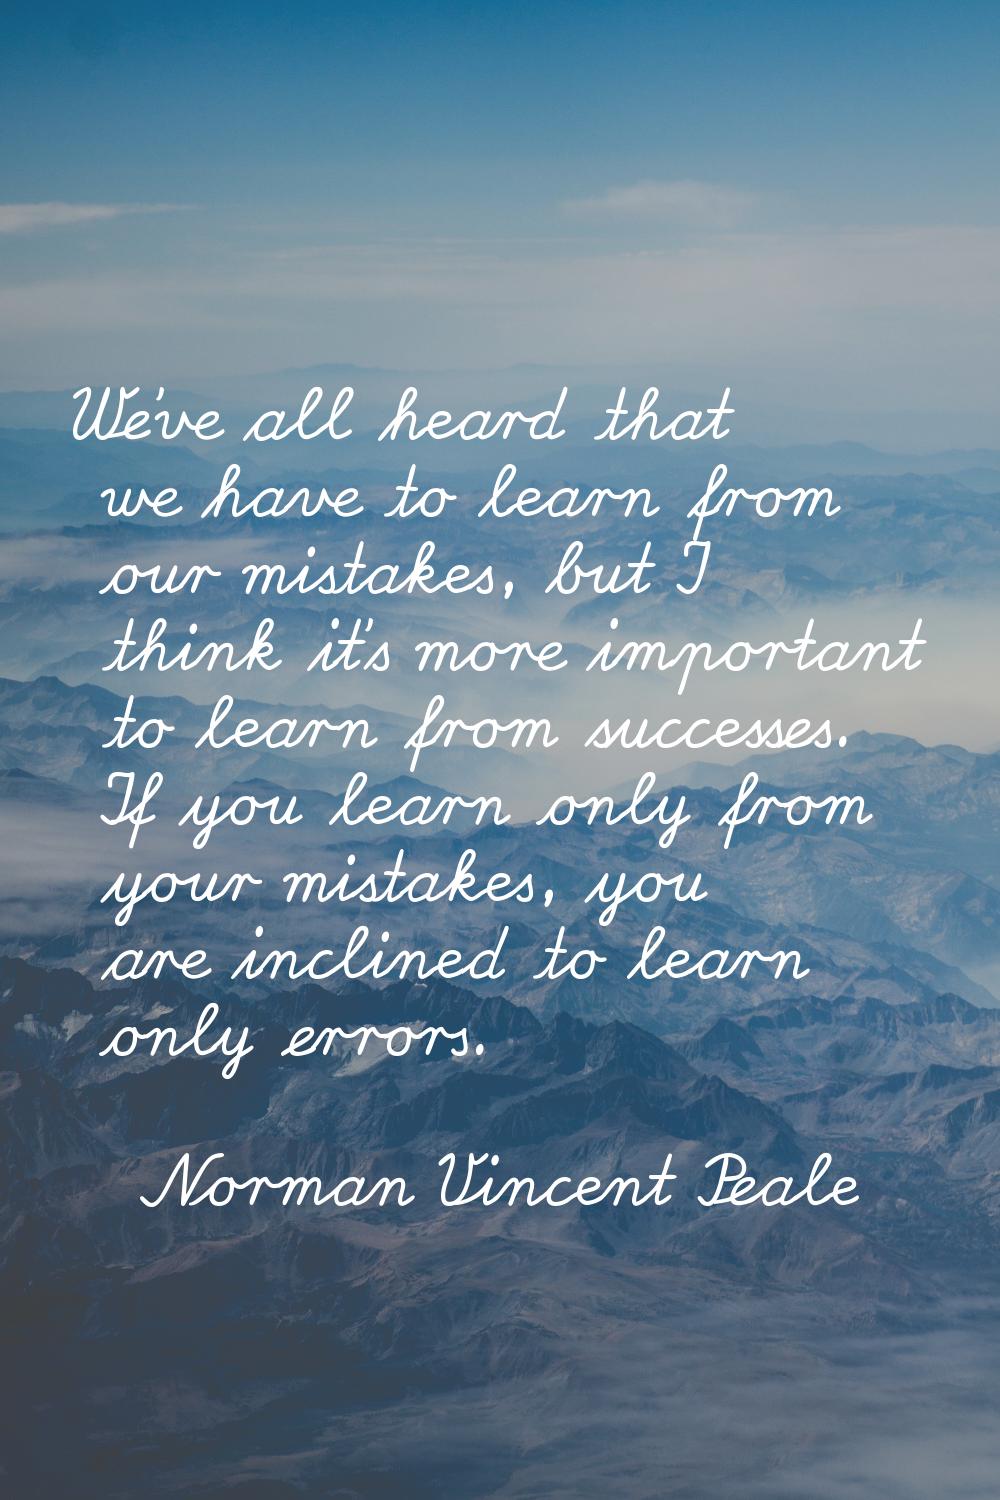 We've all heard that we have to learn from our mistakes, but I think it's more important to learn f